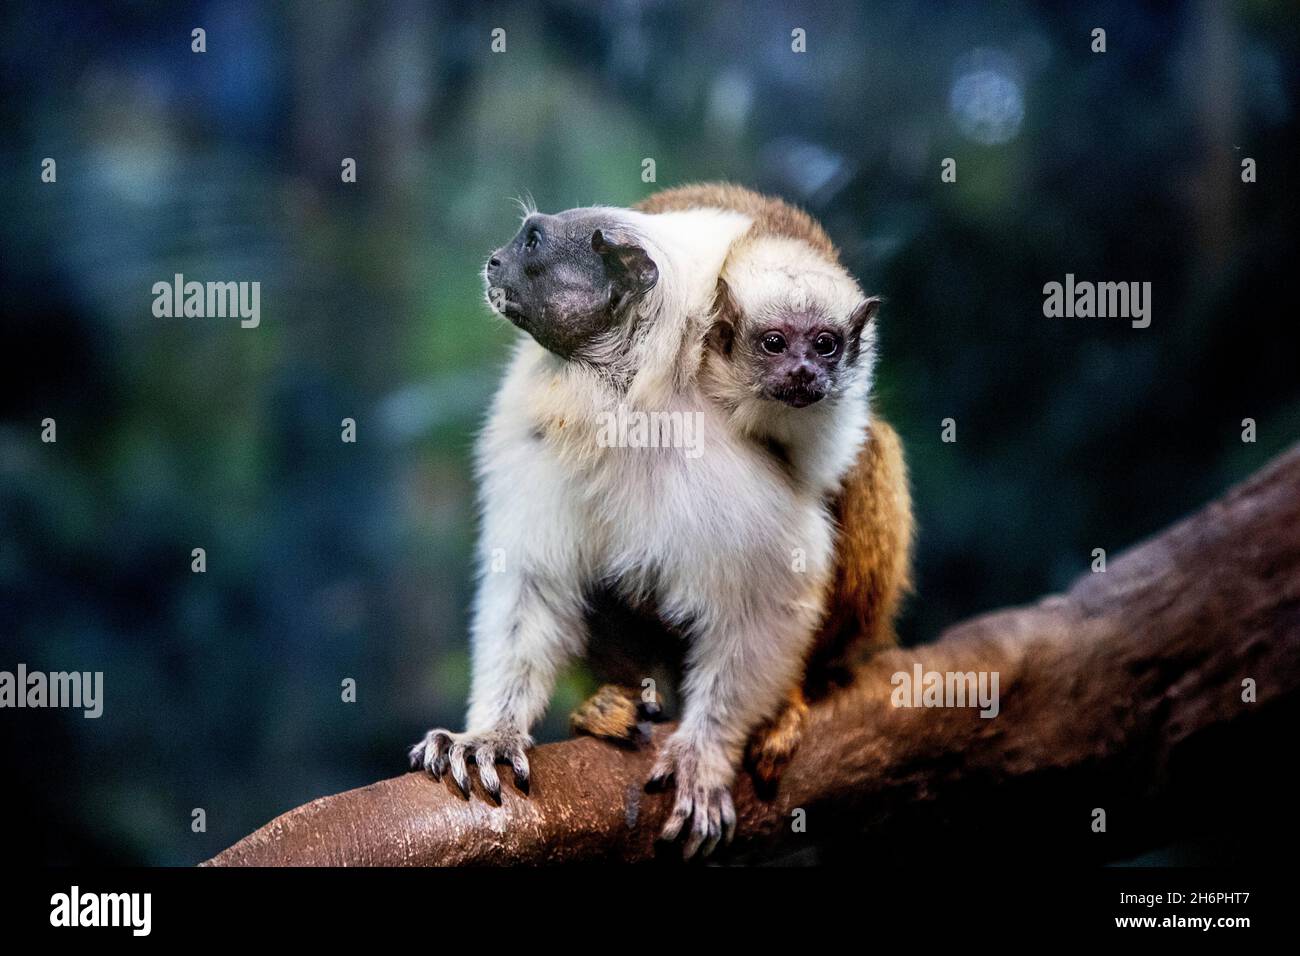 Gothenburg, Sweden, on Nov. 17, 2021, A pair of twin, Pied Tamarin (Saguinus bicolor) babies hold on to their parents' back for safety's sake at Universeum in Gothenburg, Sweden, on Nov. 17, 2021. The twins were born in September and were released into the rainforest area yesterday.  Photo by Adam Ihse / TT / Code 9200 Stock Photo